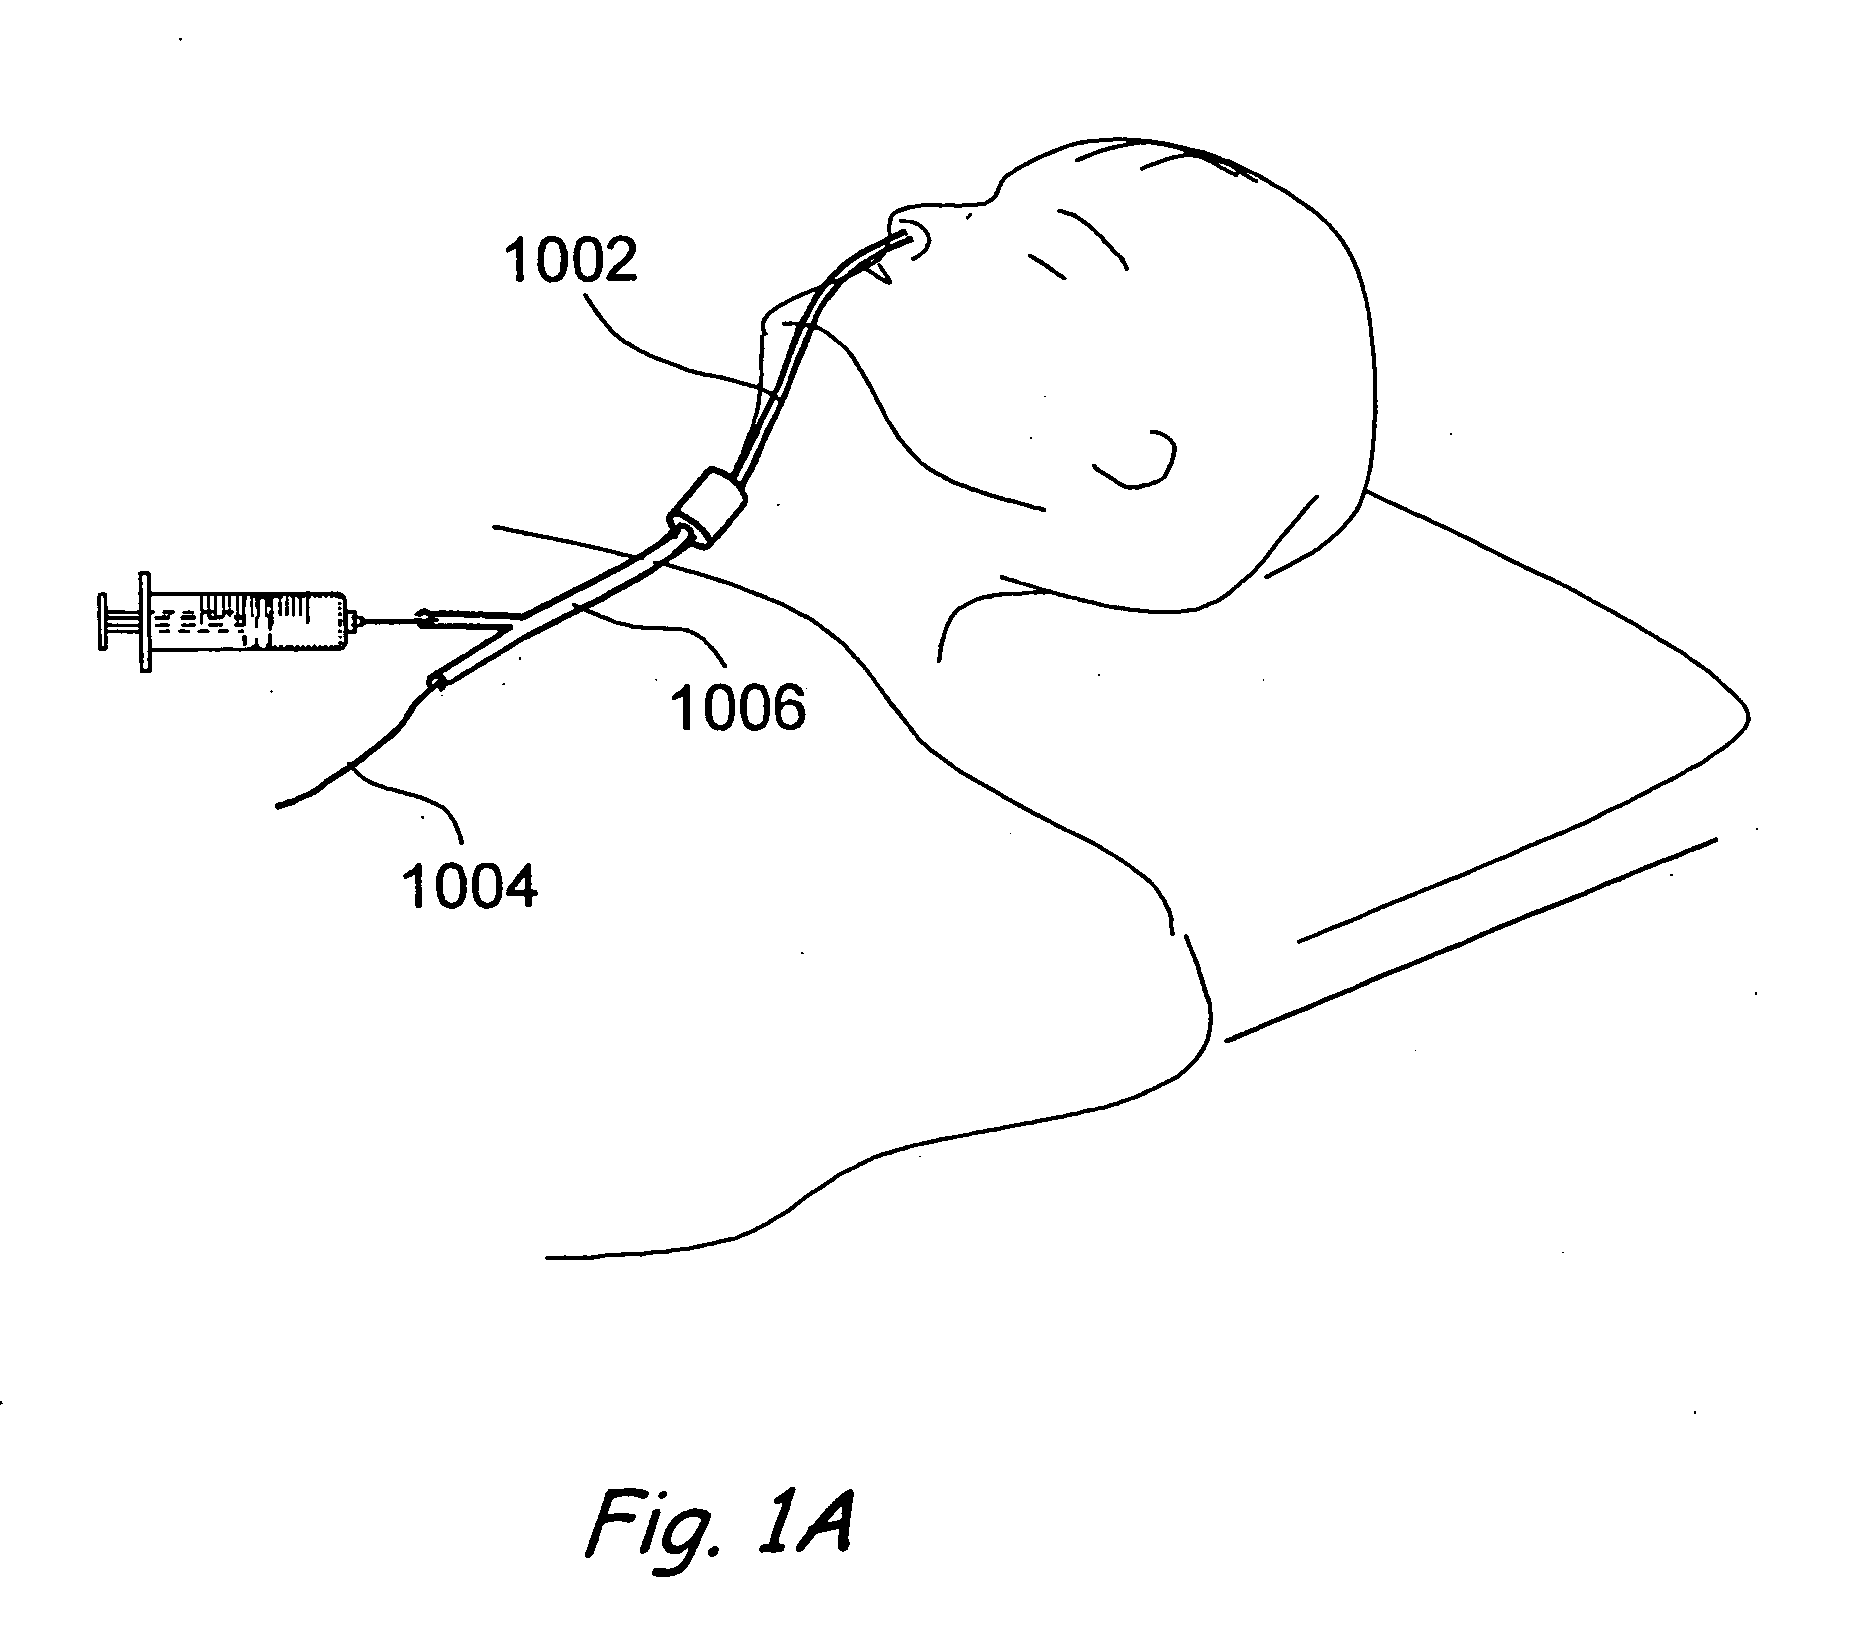 Apparatus and methods for dilating and modifying ostia of paranasal sinuses and other intranasal or paranasal structures